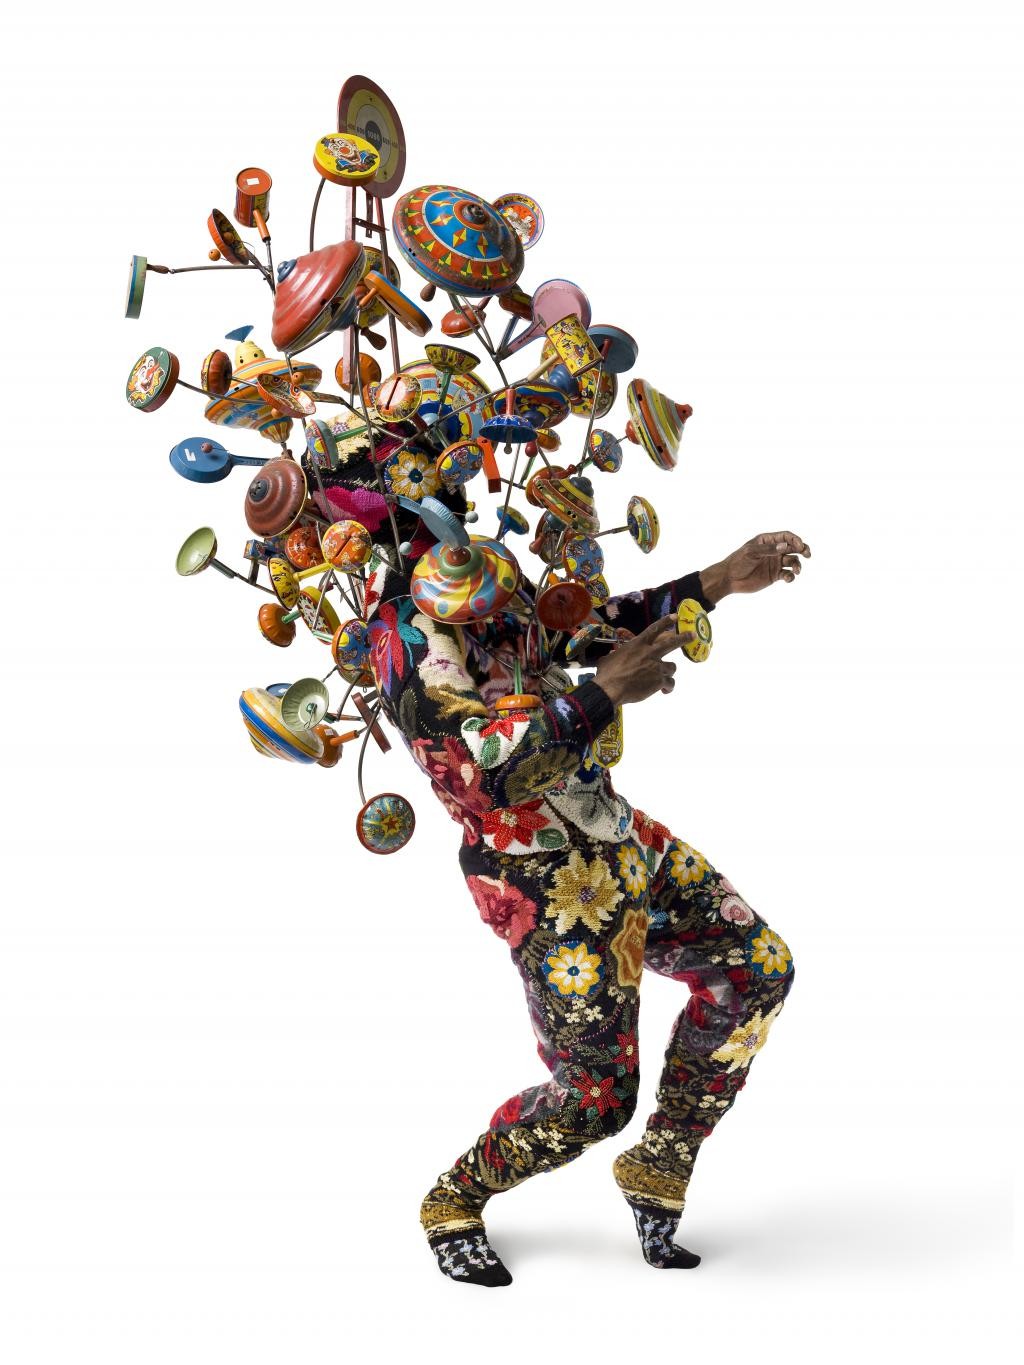 Nick Cave's Soundsuit #1 is available on Artspace for $350